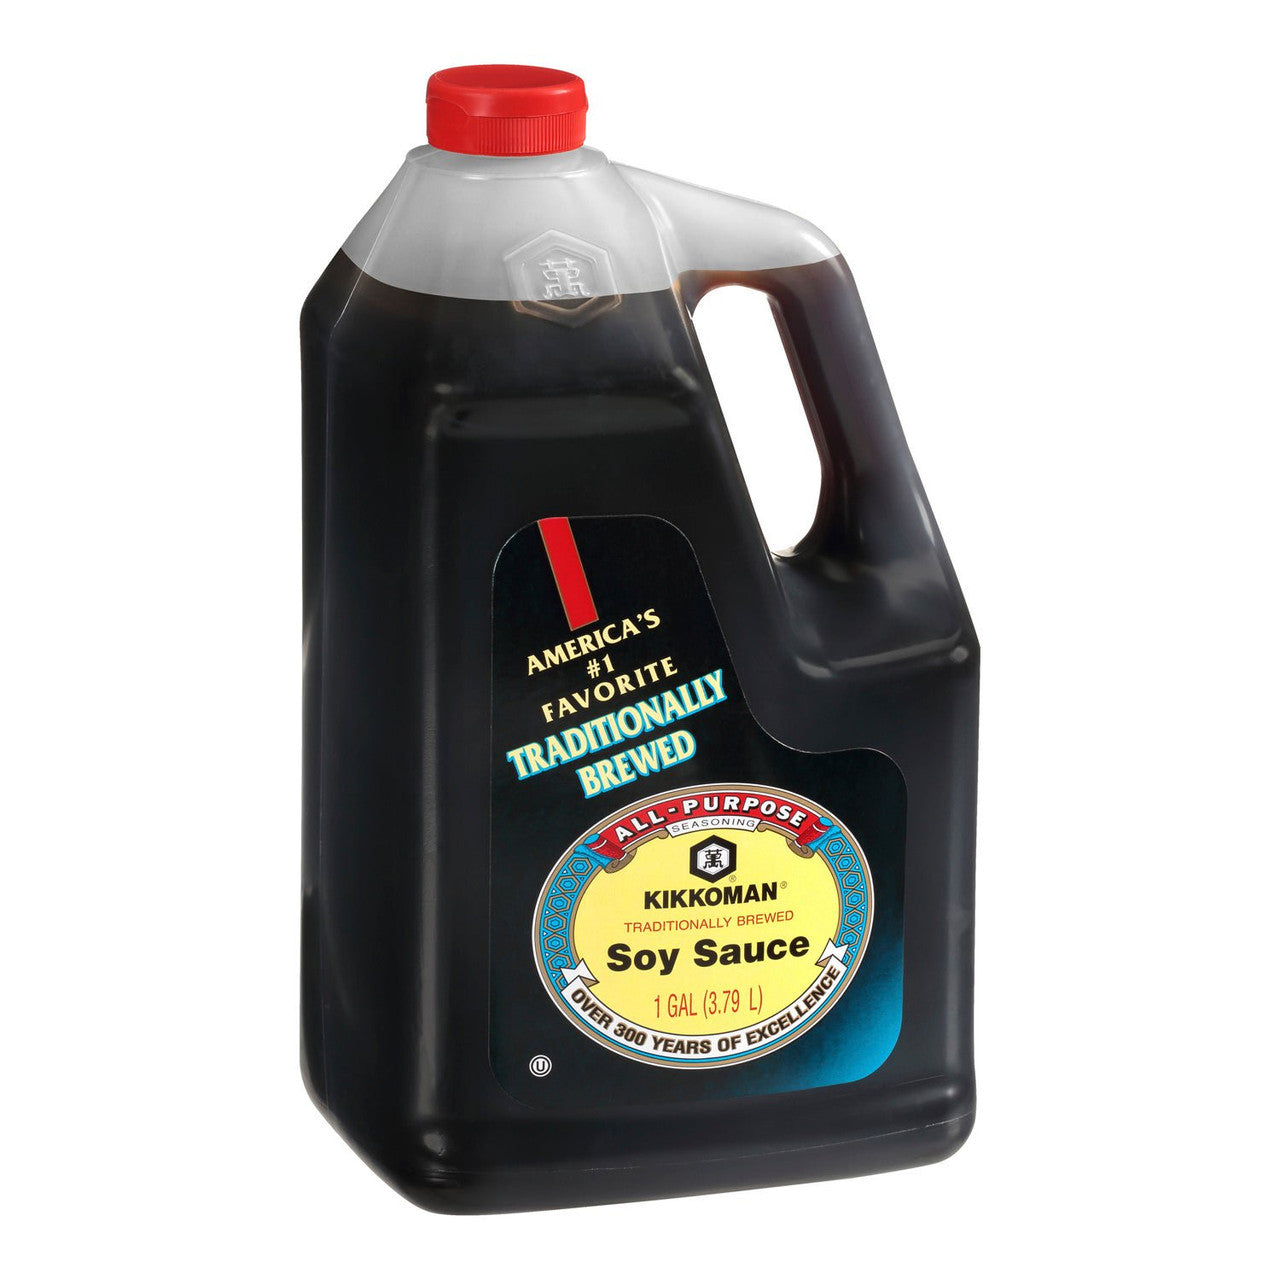 Kikkoman Traditionally Brewed Soy Sauce, 3.79L/1 Gal., Jug {Imported from Canada}